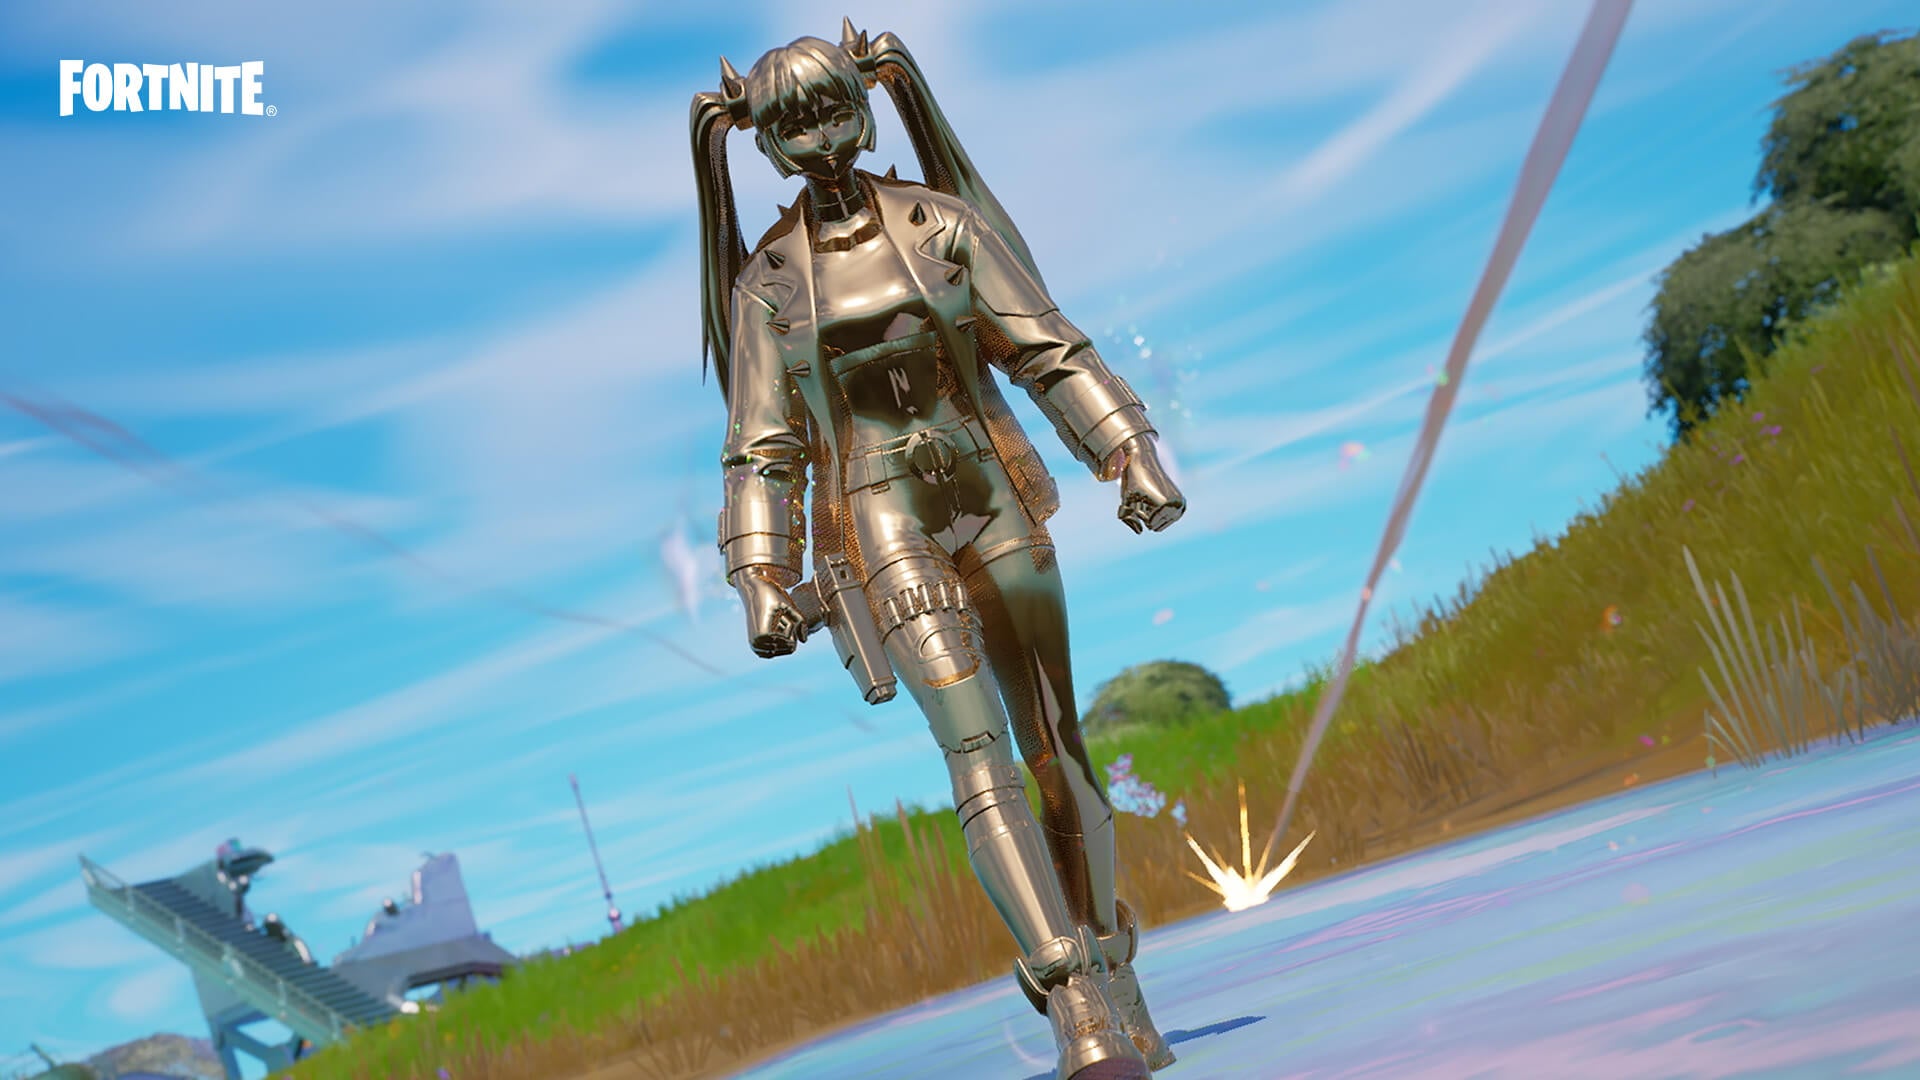 a chrome-covered character walks towards the screen